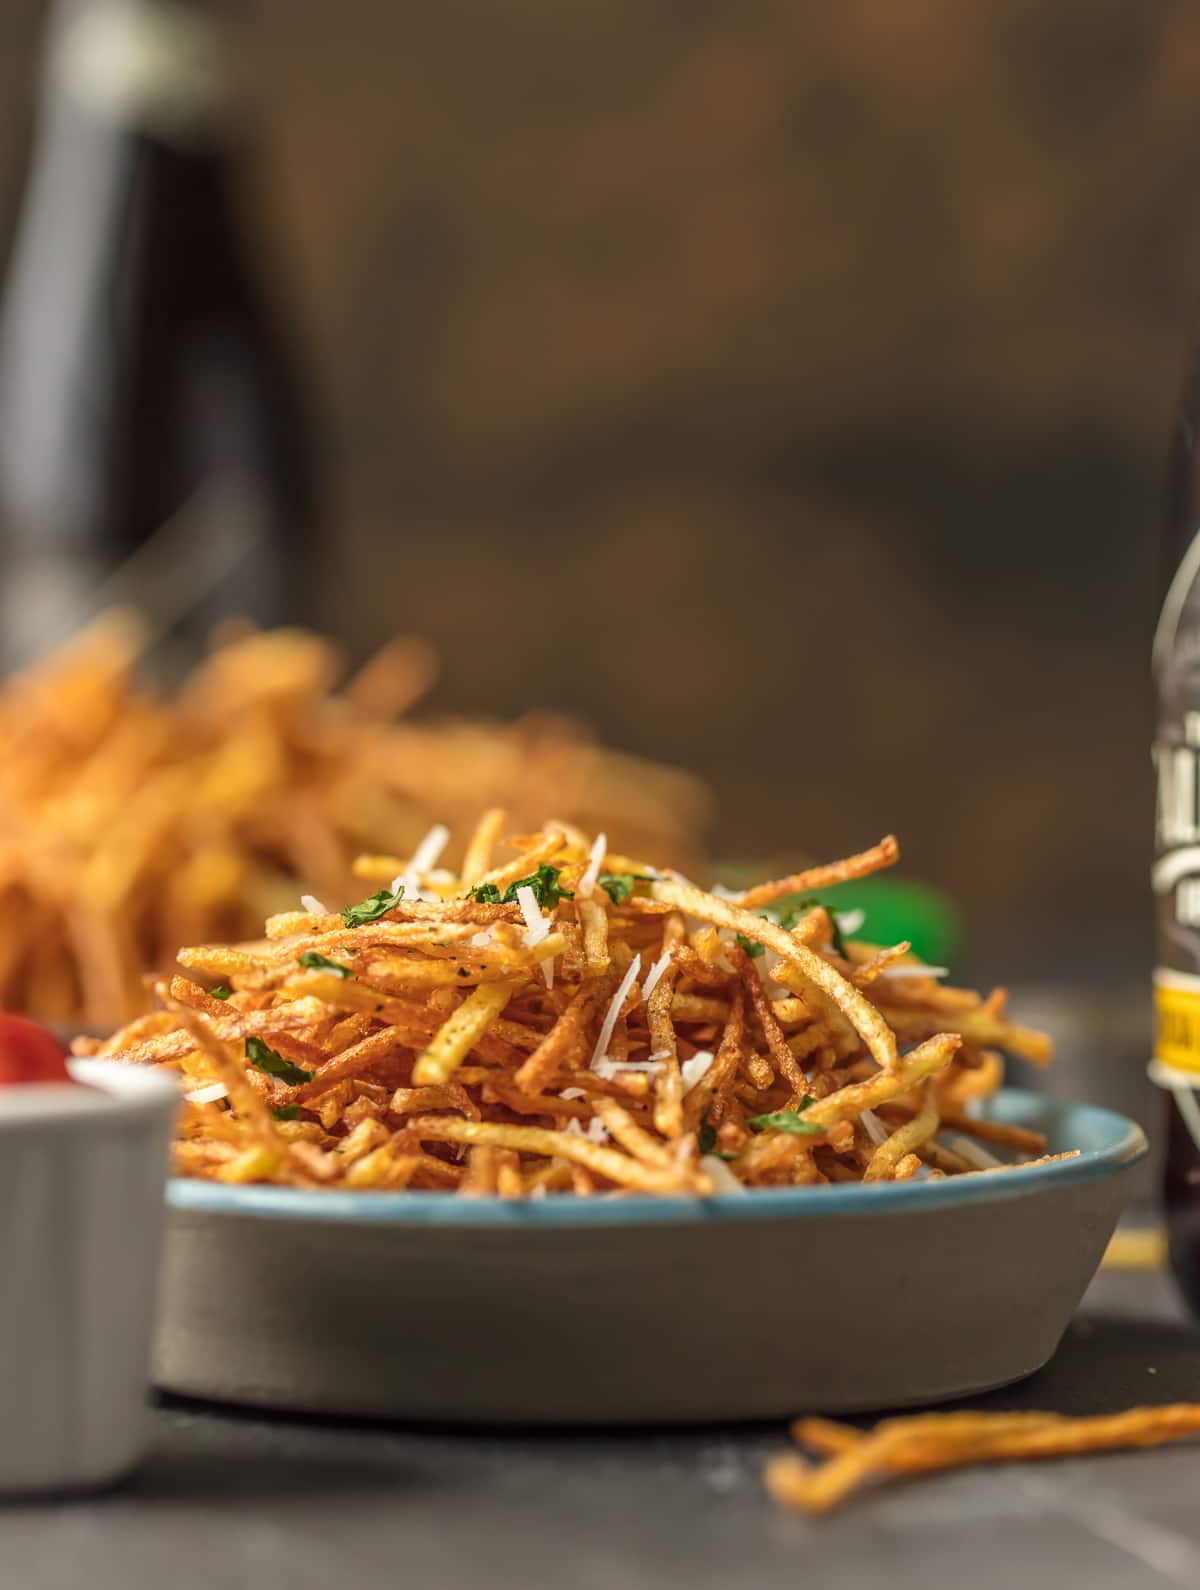 Homemade Shoestring French Fries, Air Fry, Bake or Fry